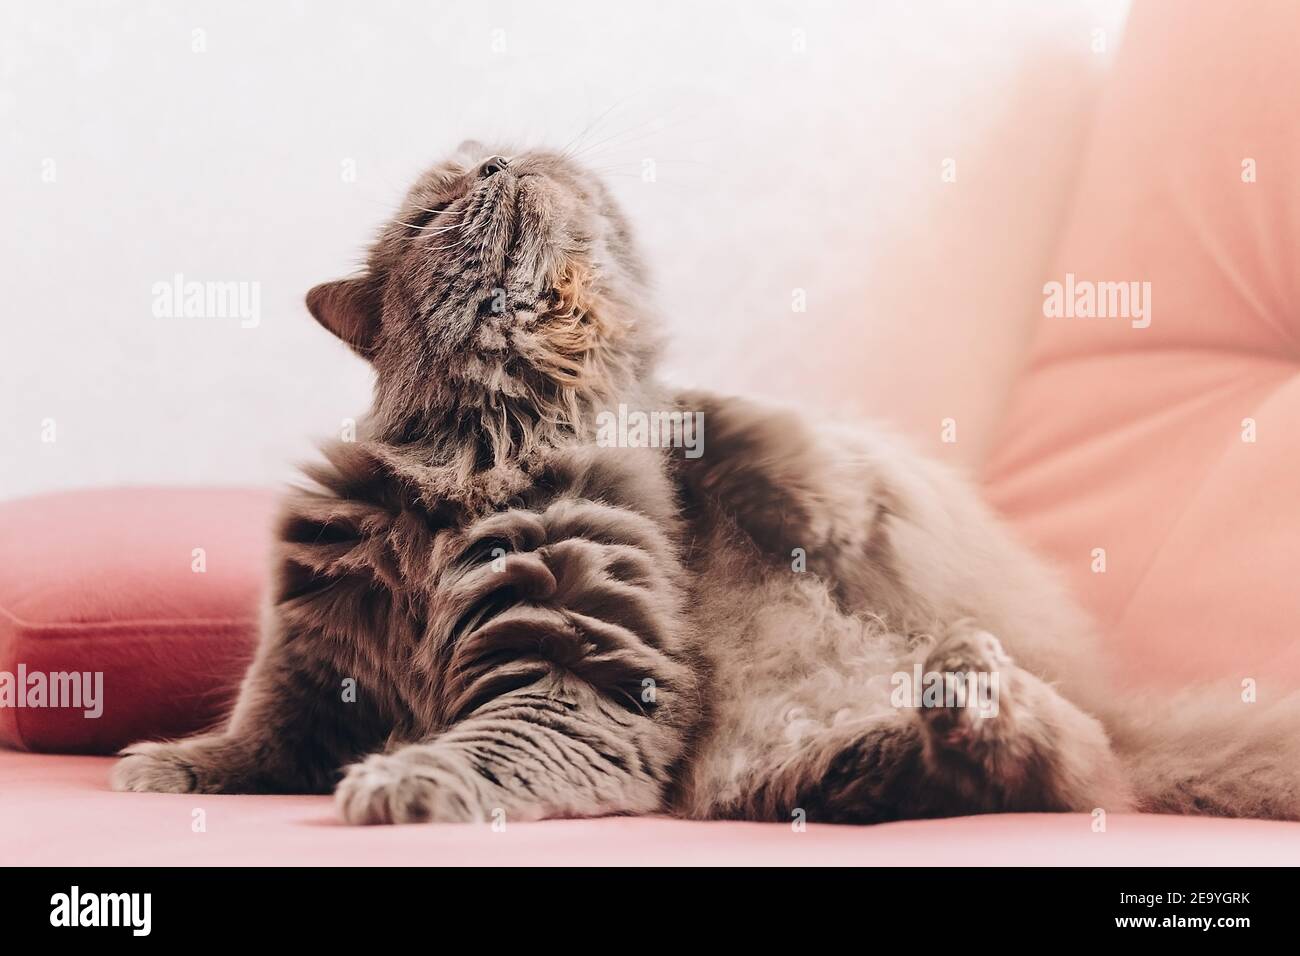 one gray fluffy cat lies on a pink couch and scratches its neck Stock Photo